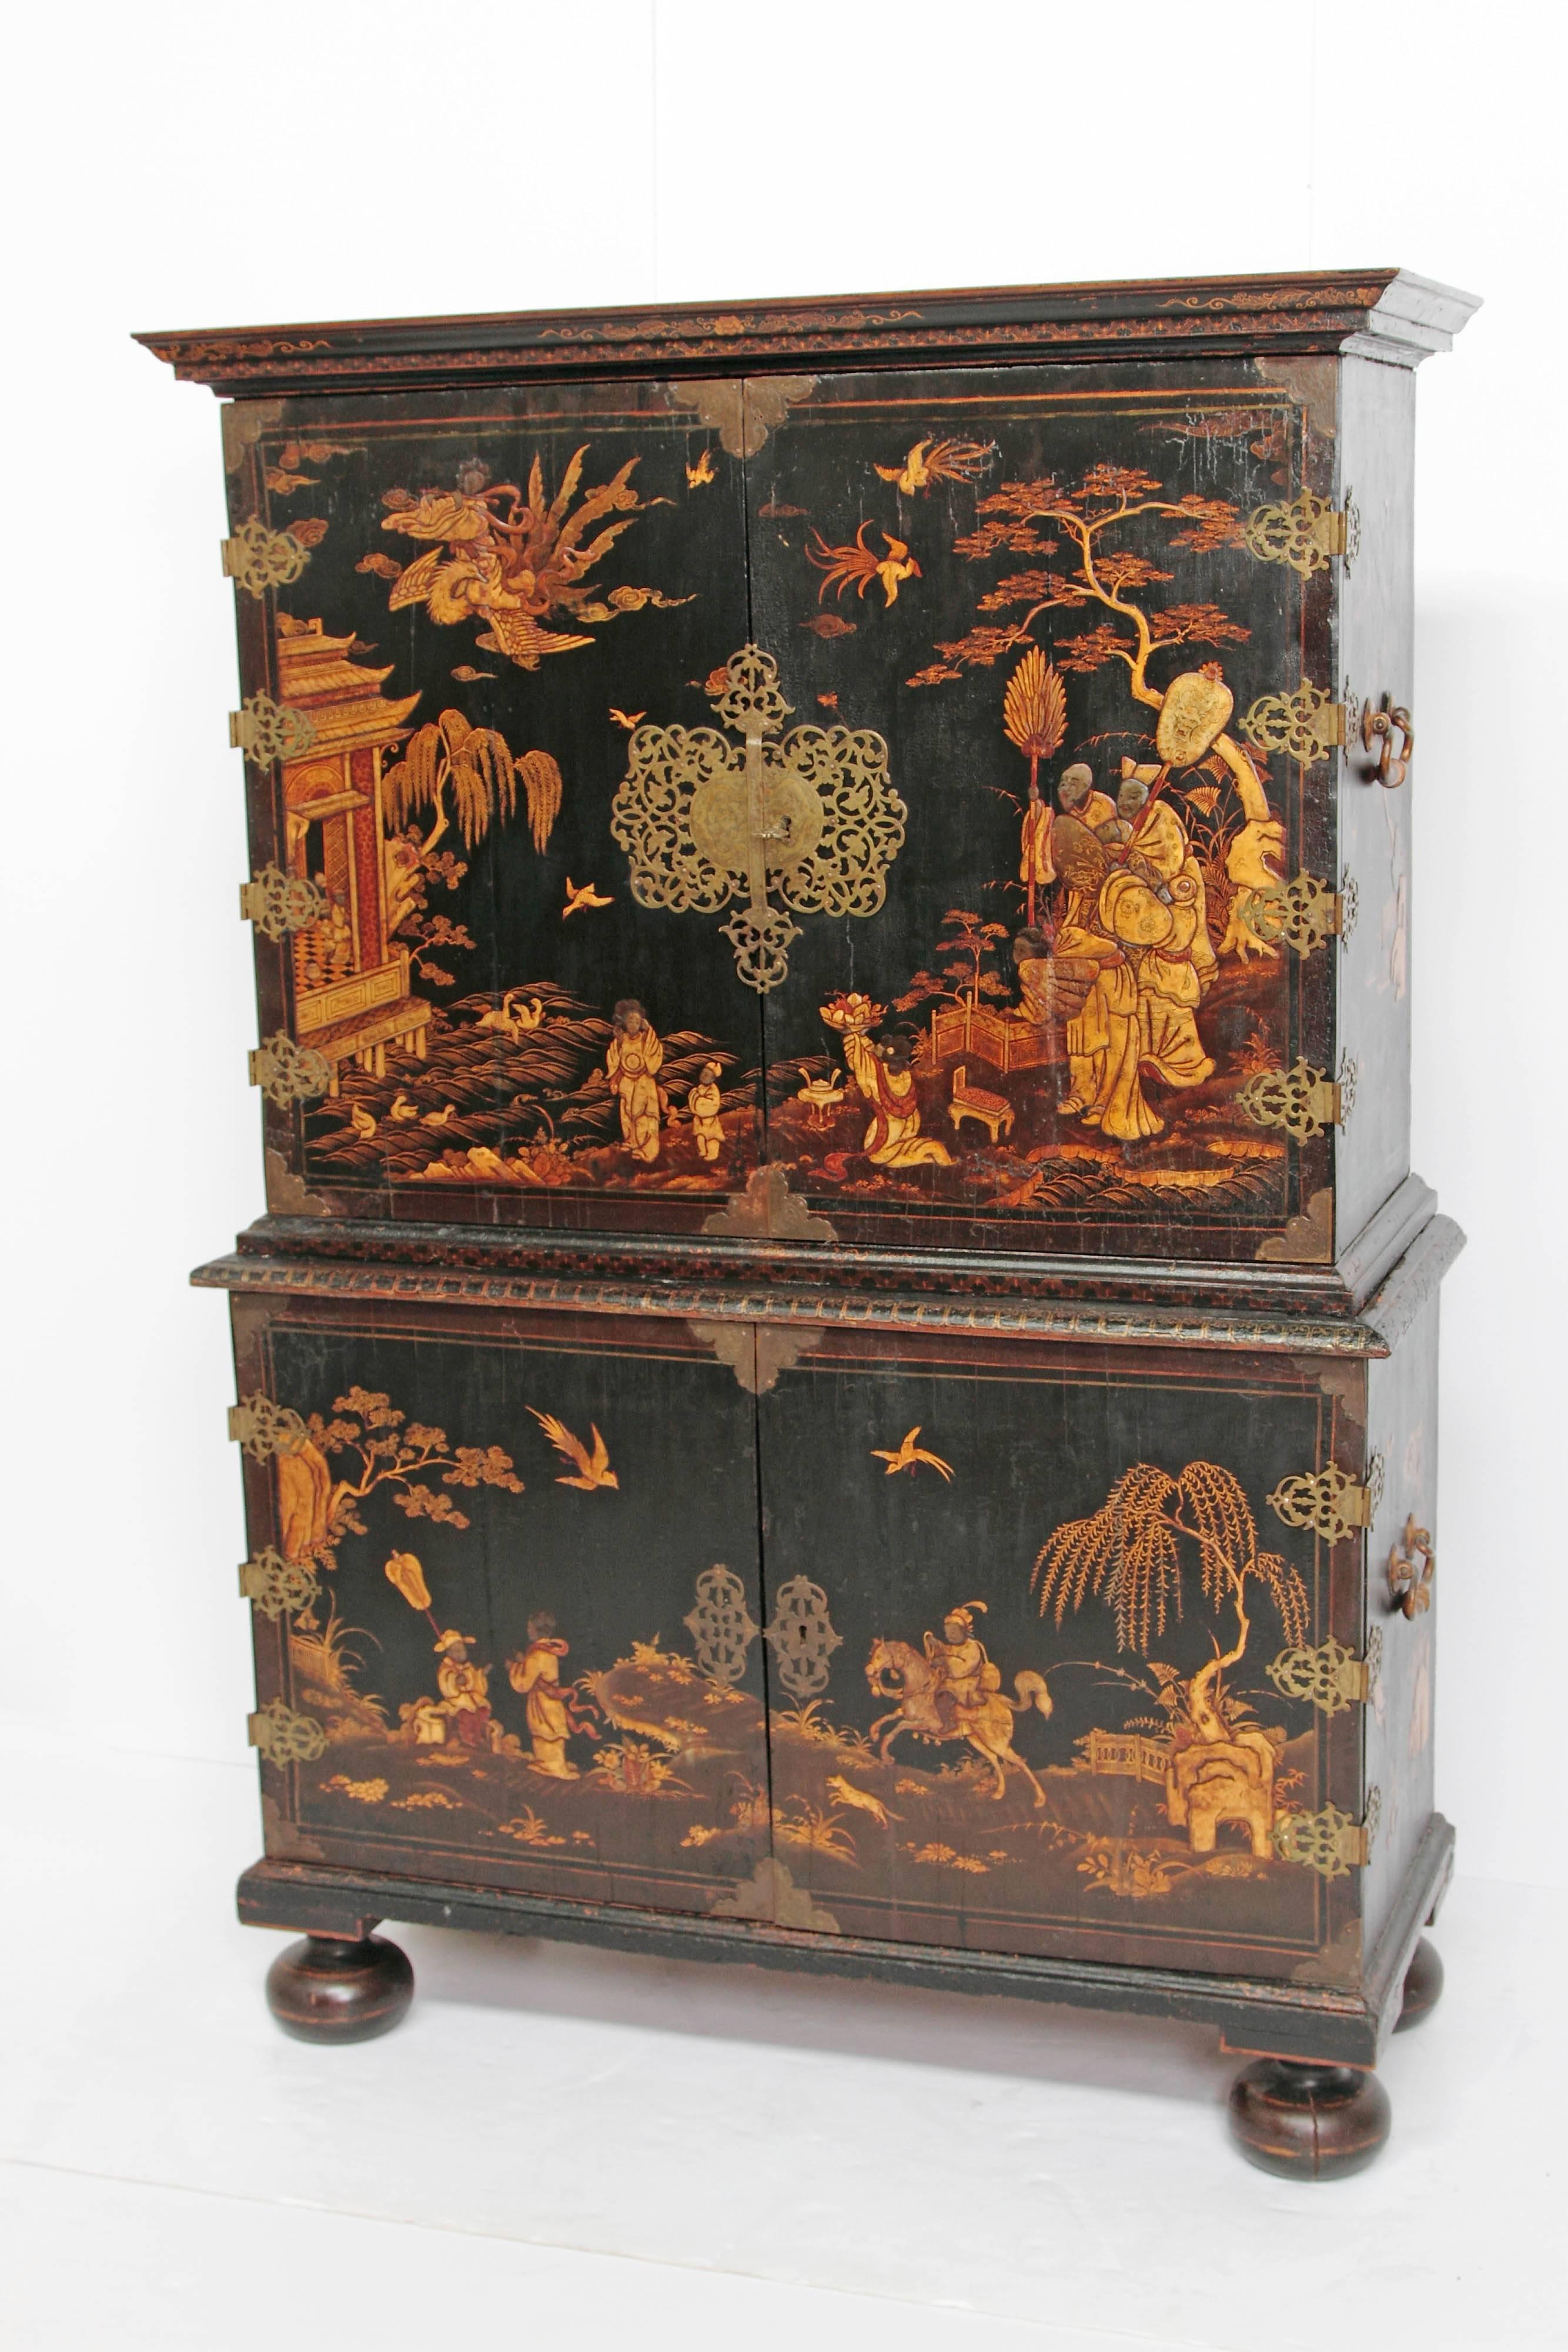 An English Queen Anne period collectors cabinet, black lacquer with raised gold decoration / Japanned (with chinoiserie decoration), two doors at top open to expose six (6) drawers, beside two (2) shelves, and a compartment with a door, base has two